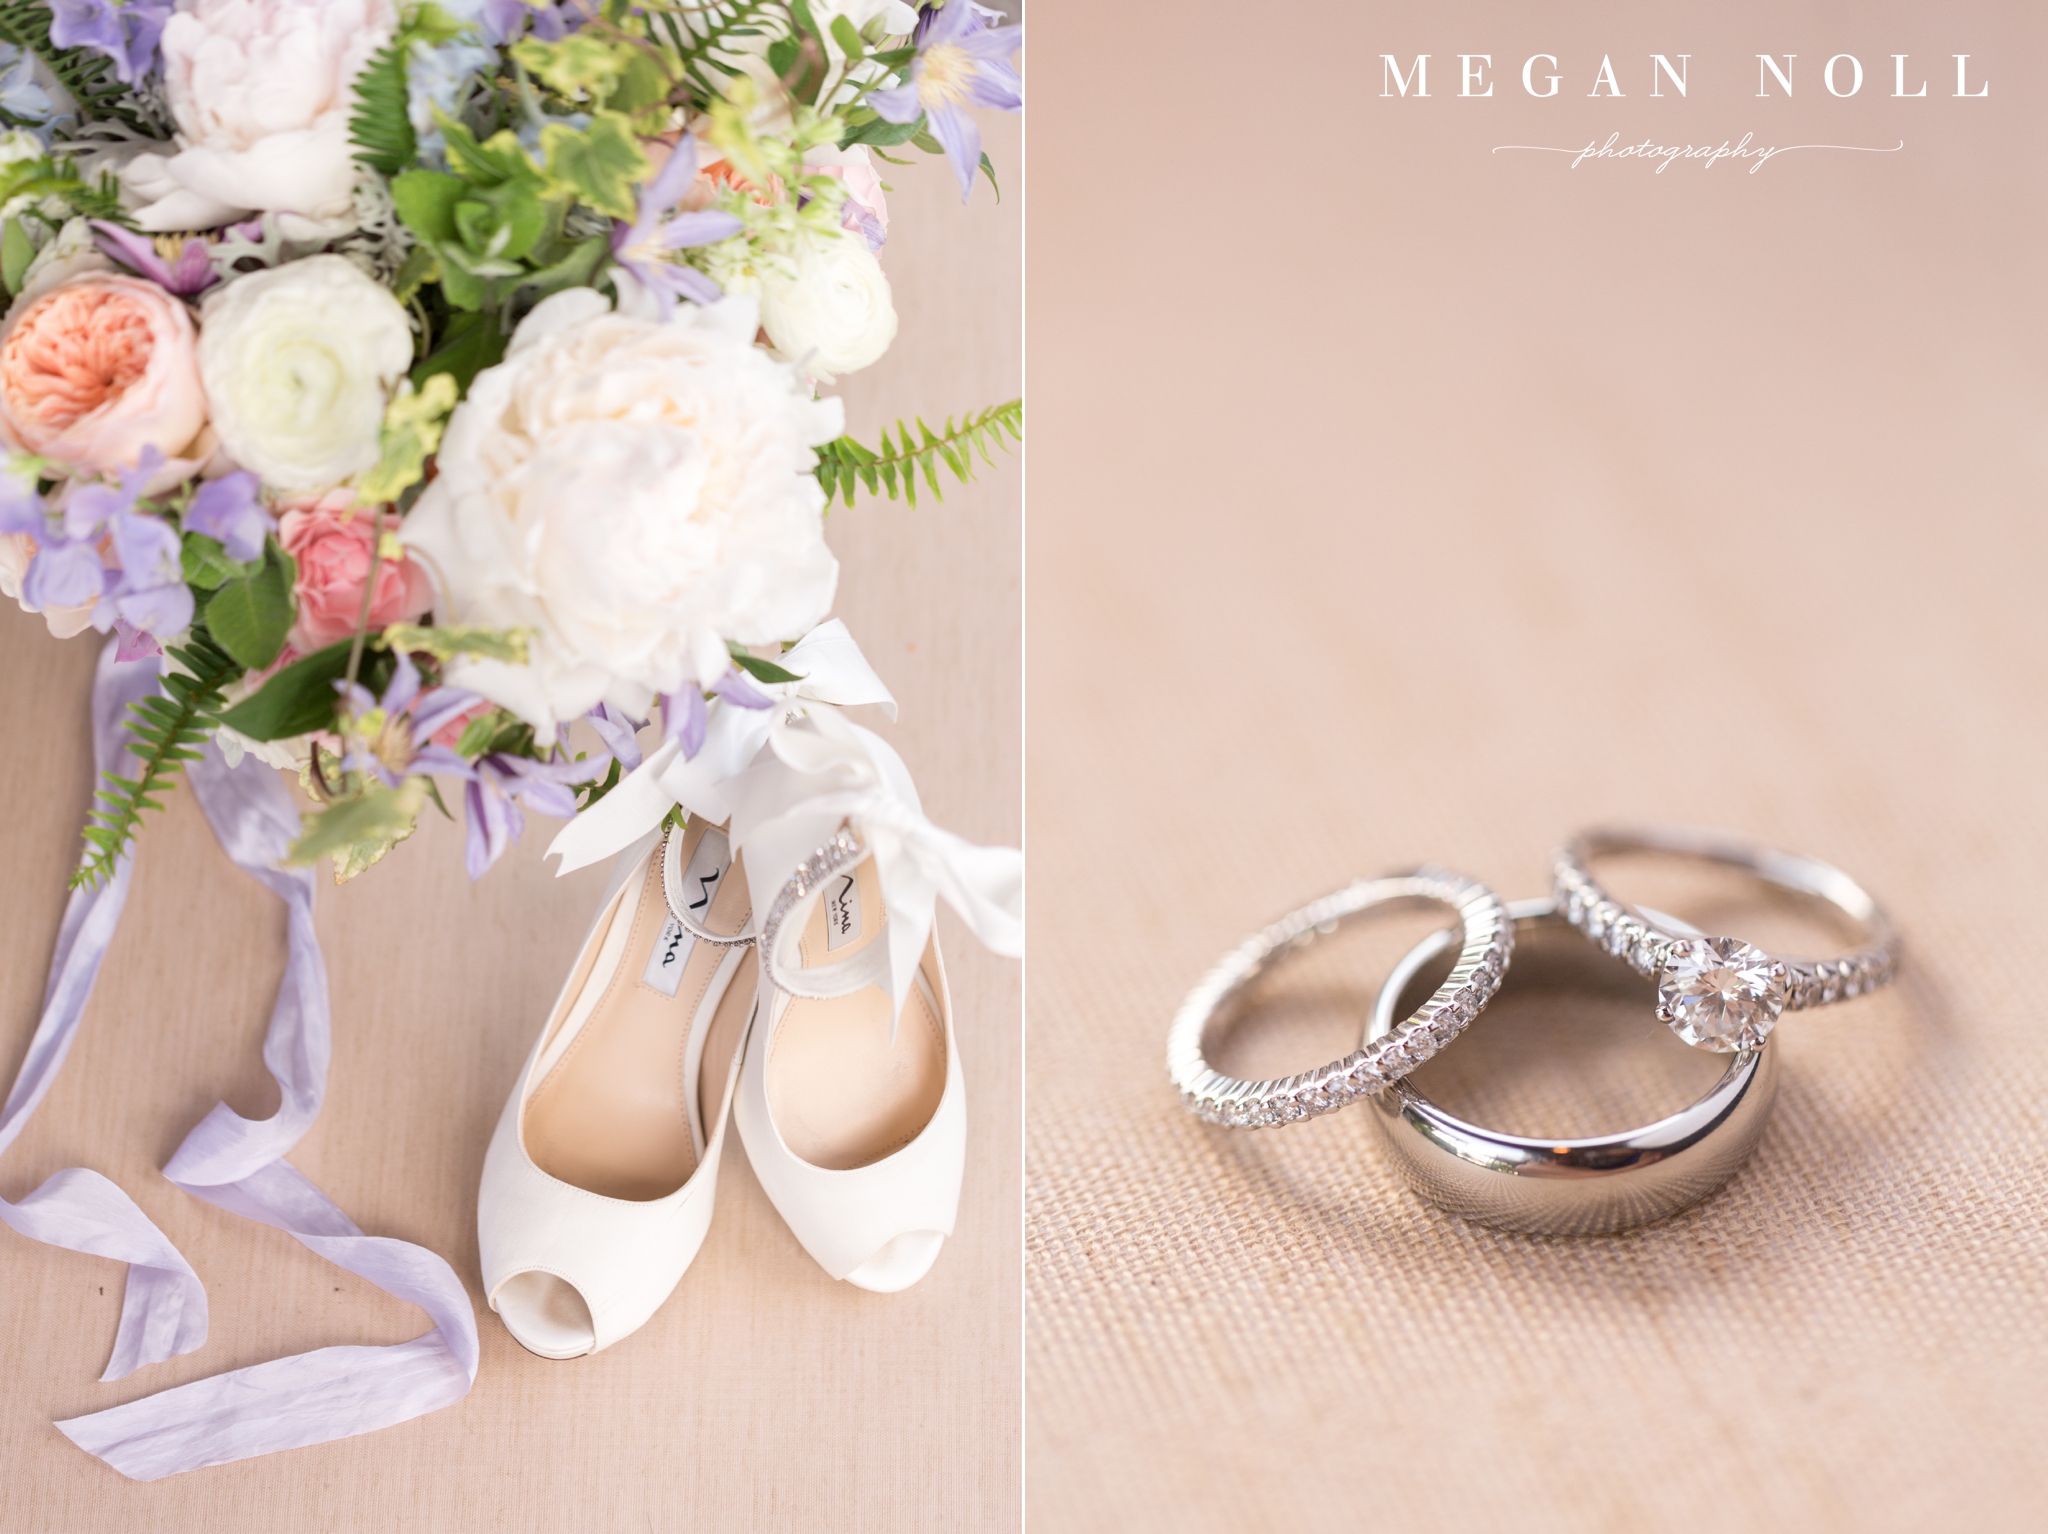 Detail Pictures, Ring Pictures, Styled Wedding Details